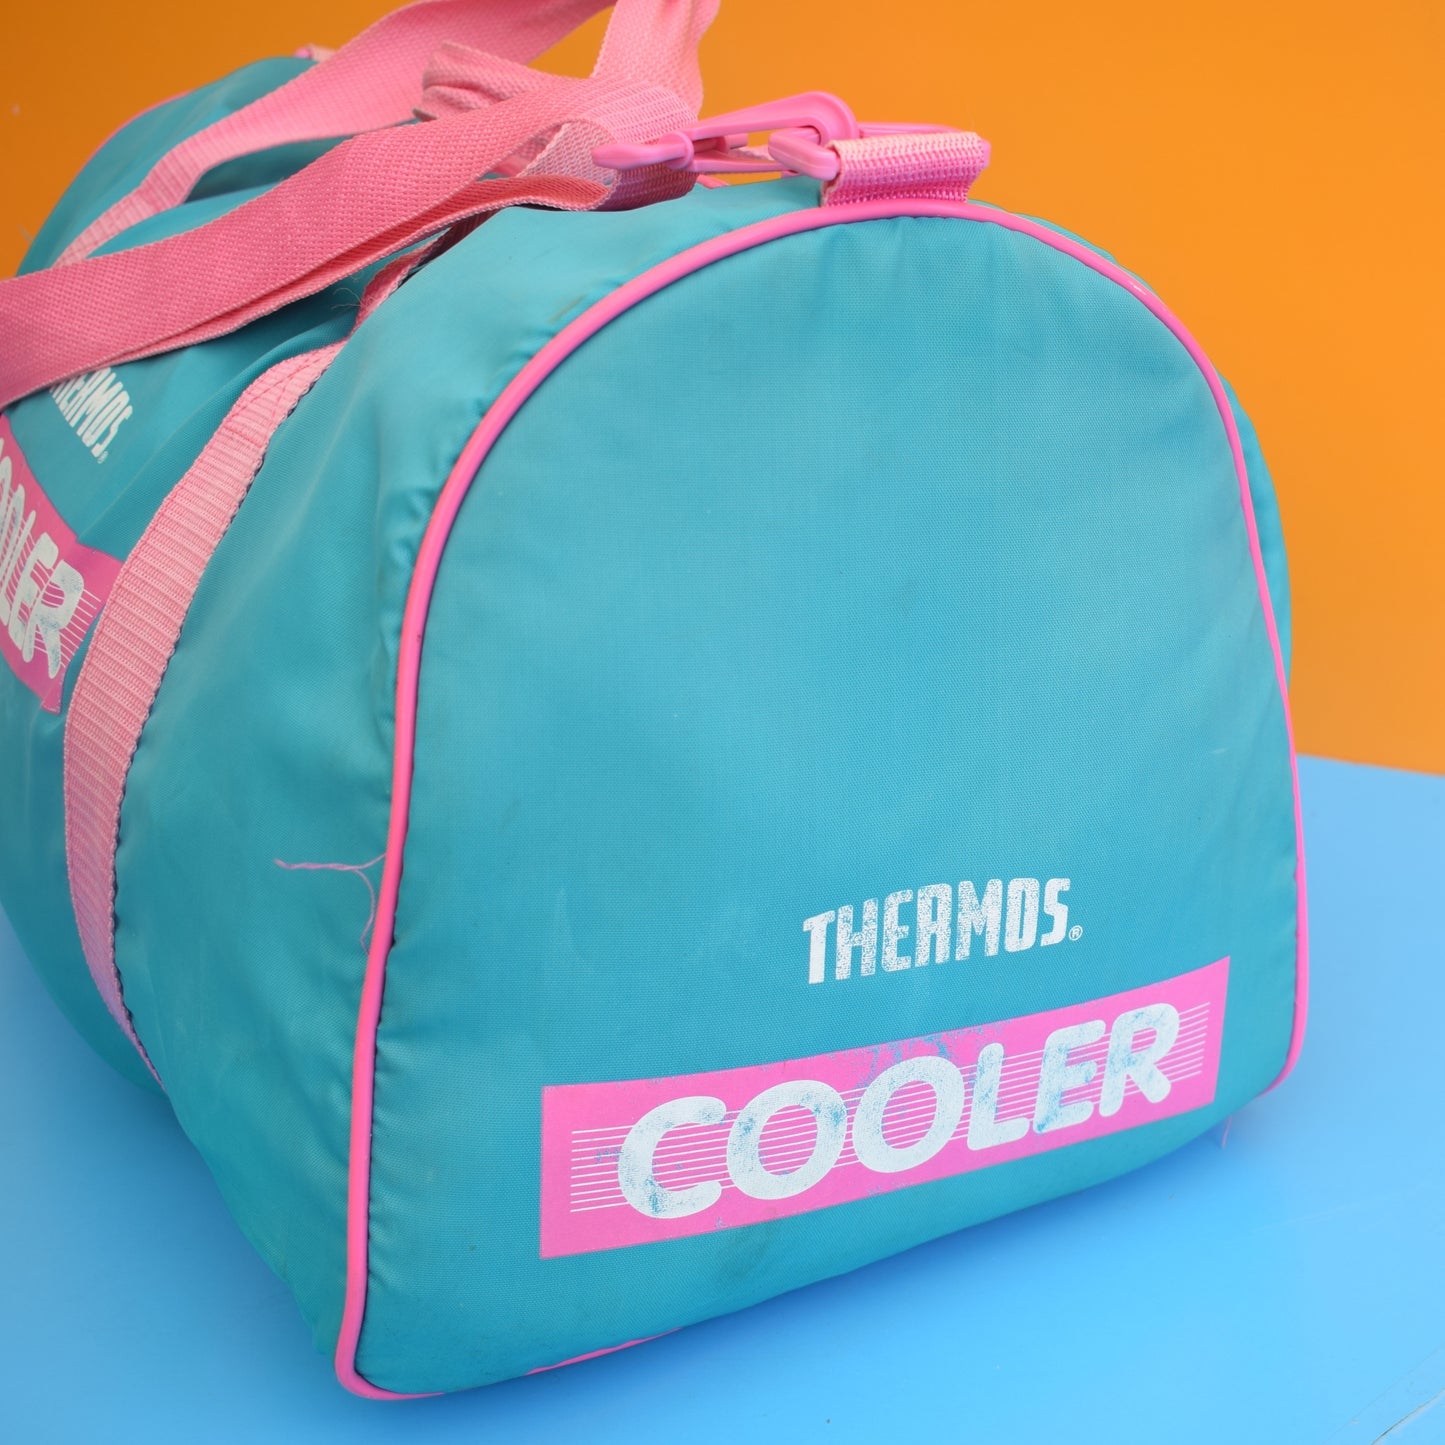 Vintage 1980s Holdall / Cool Bag- Thermos